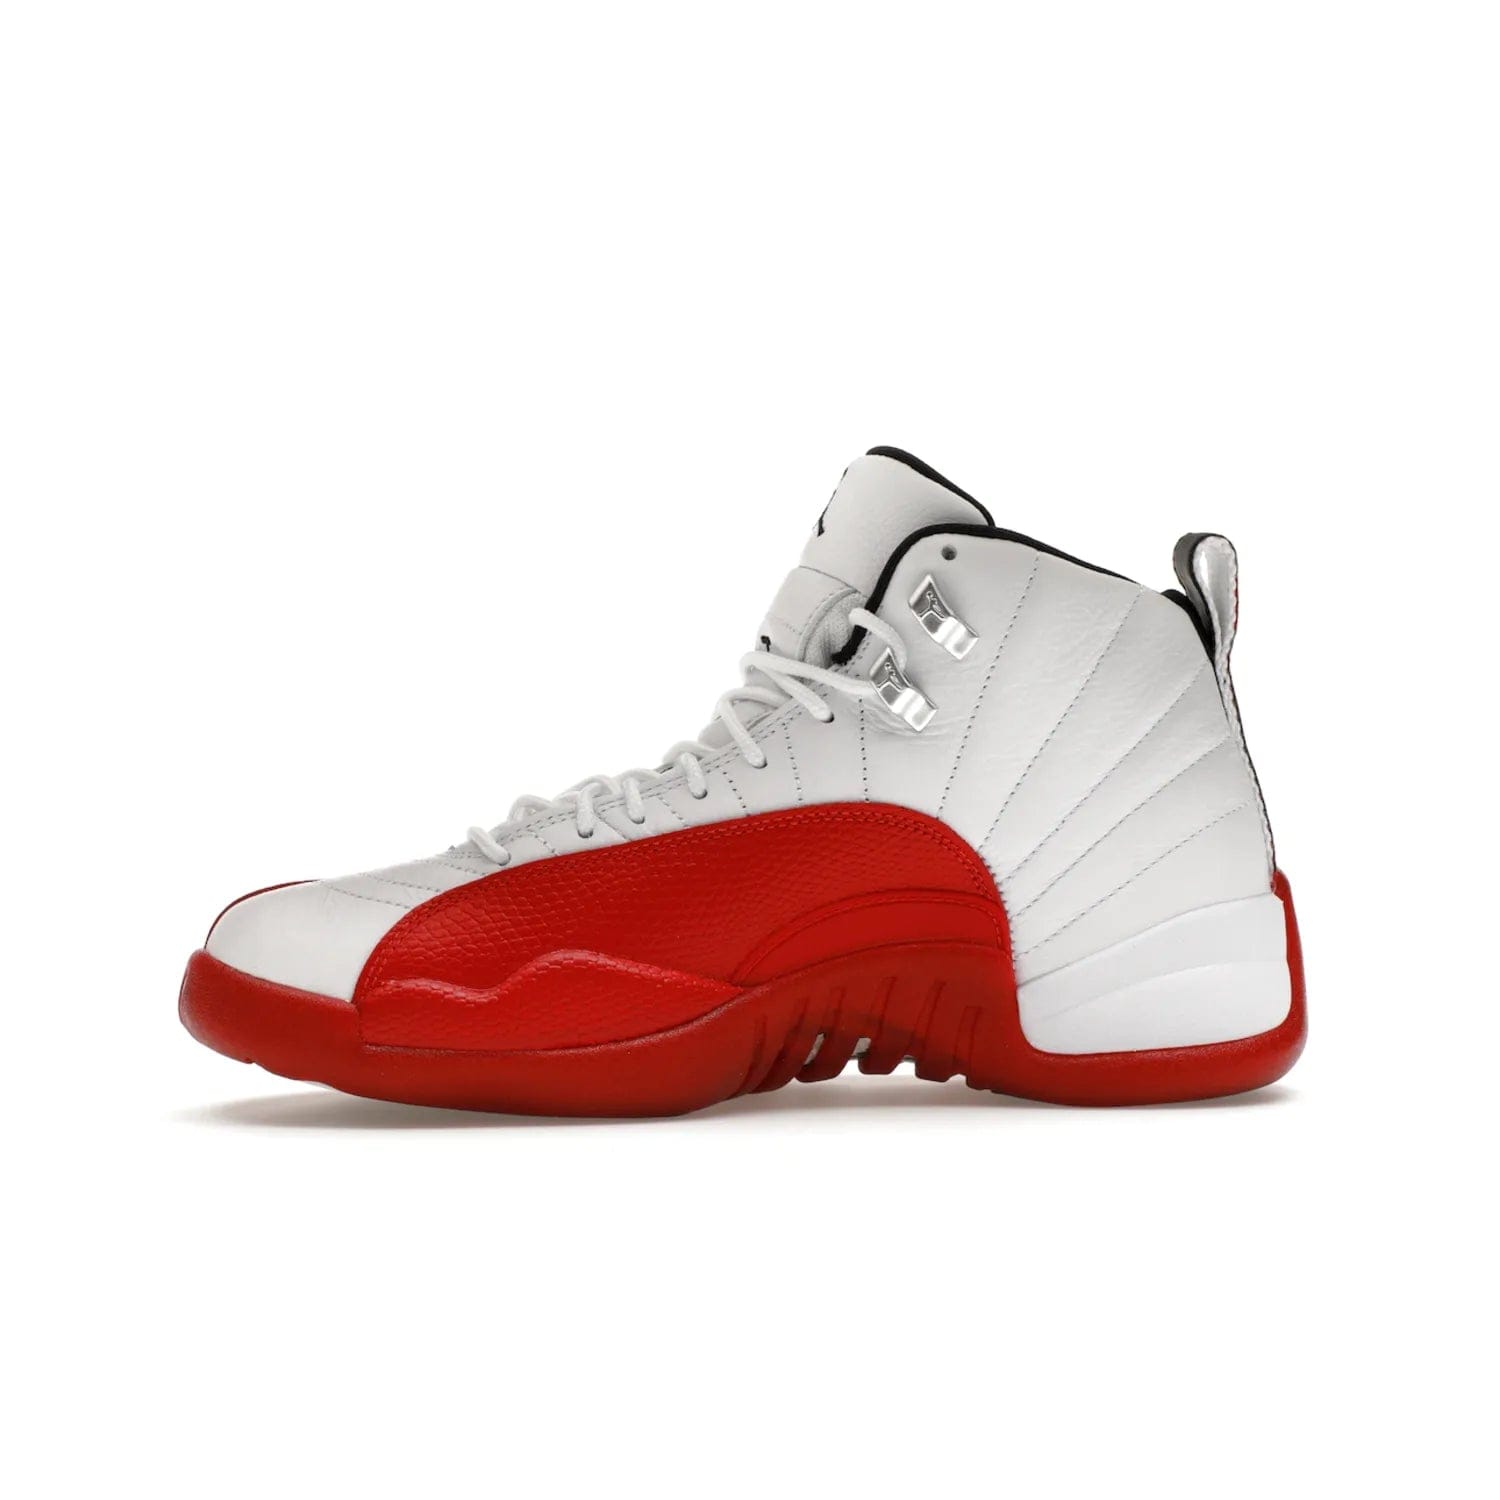 Jordan 12 Retro Cherry (2023) - Image 18 - Only at www.BallersClubKickz.com - Live your sneaker legend with the Jordan 12 Retro Cherry. Iconic pebbled leather mudguards, quilted uppers, and varsity red accents make this 1997 classic a must-have for 2023. Shine on with silver hardware and matching midsoles, and bring it all together for limited-edition style on October 28th. Step into Jordan legacy with the Retro Cherry.